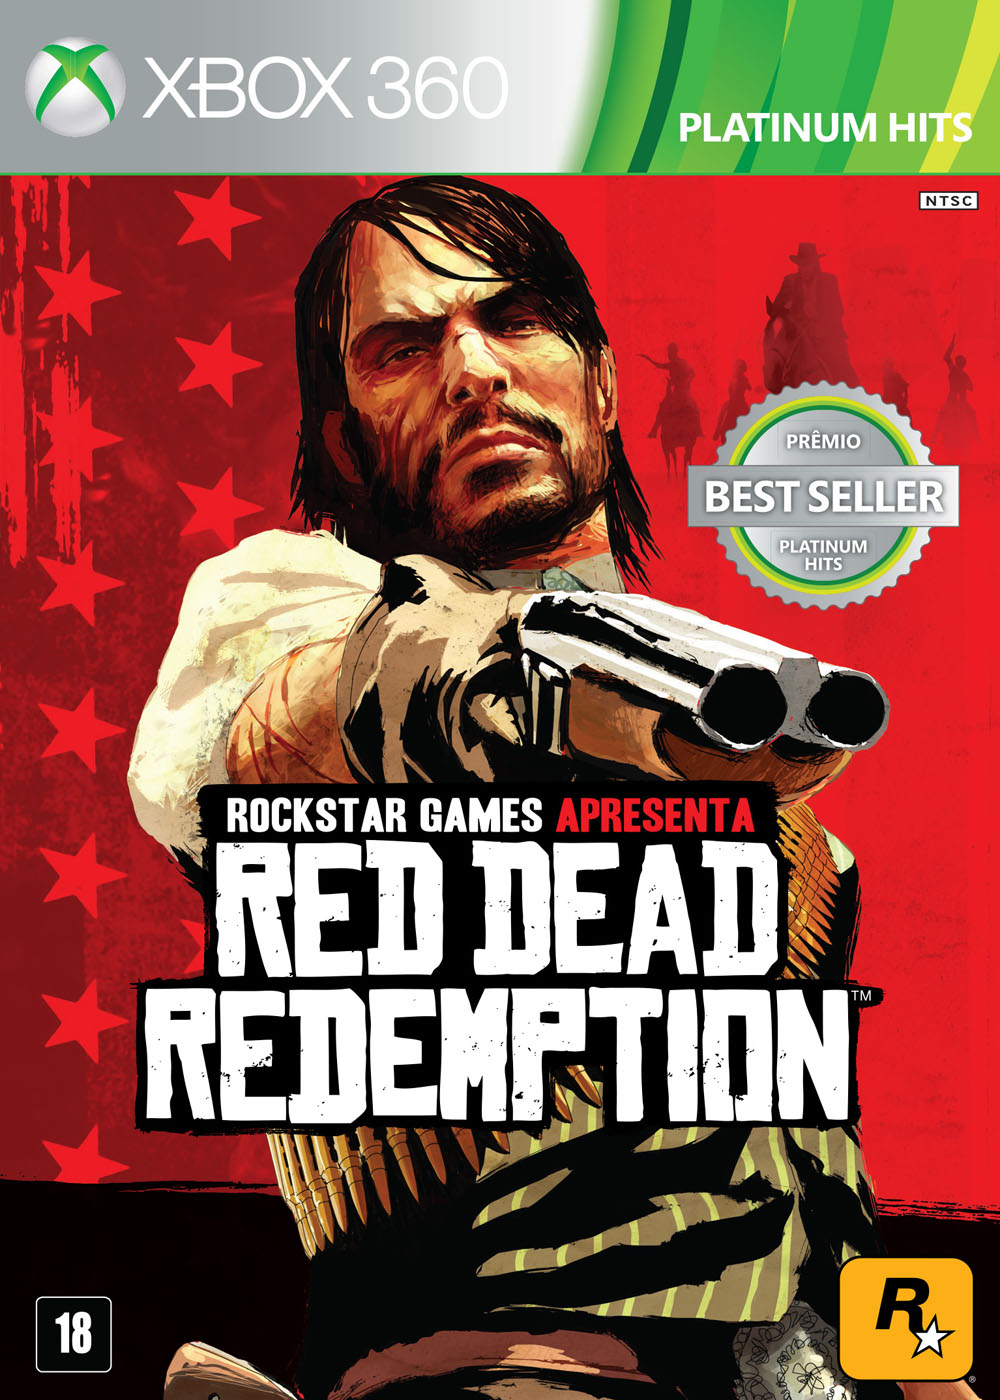 What Xbox Games Are Like Red Dead Redemption